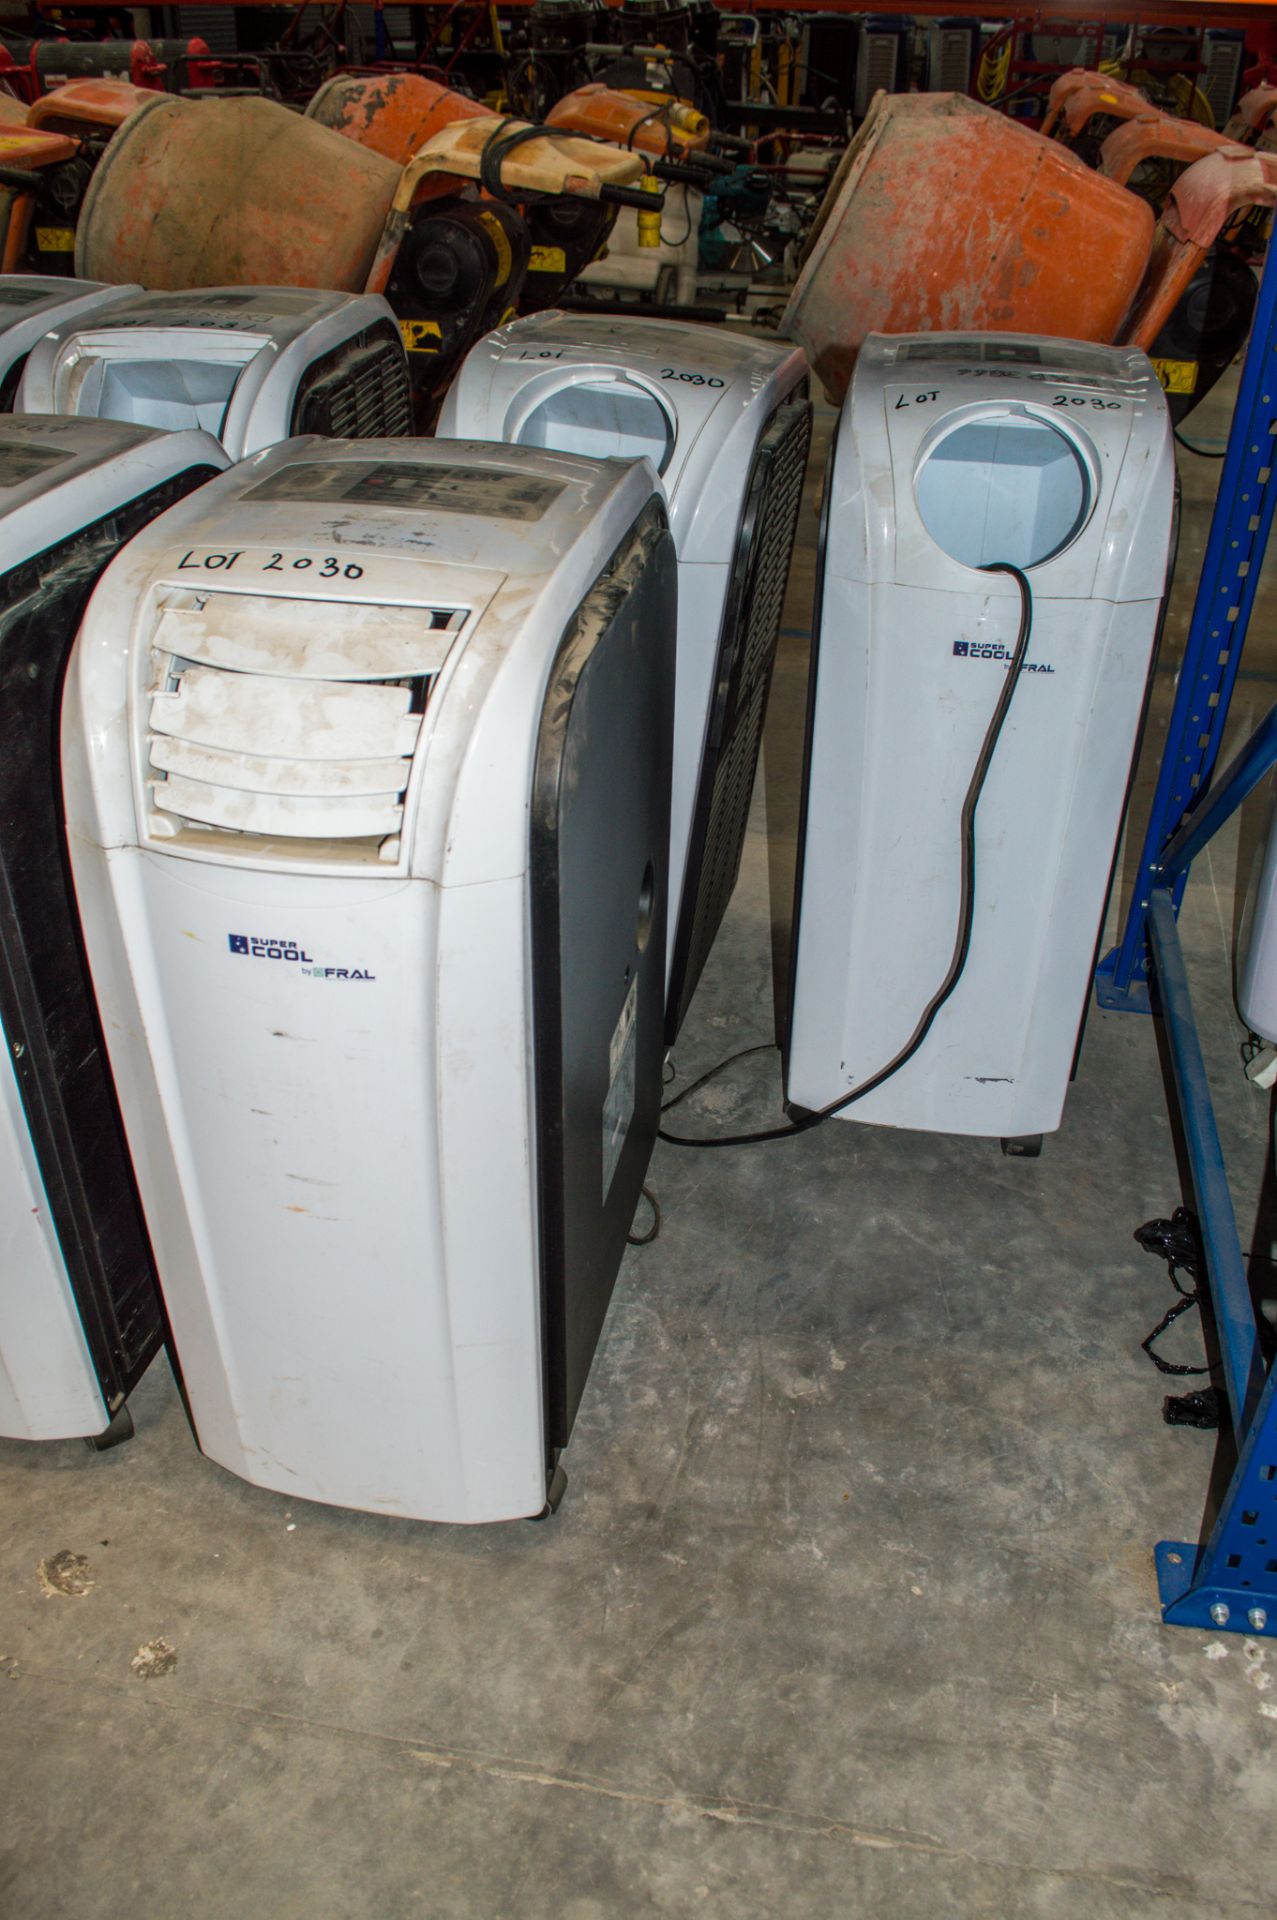 3 - Fral Super Cool 240v air conditioning units EXP3858, EXP3866, EXP3869